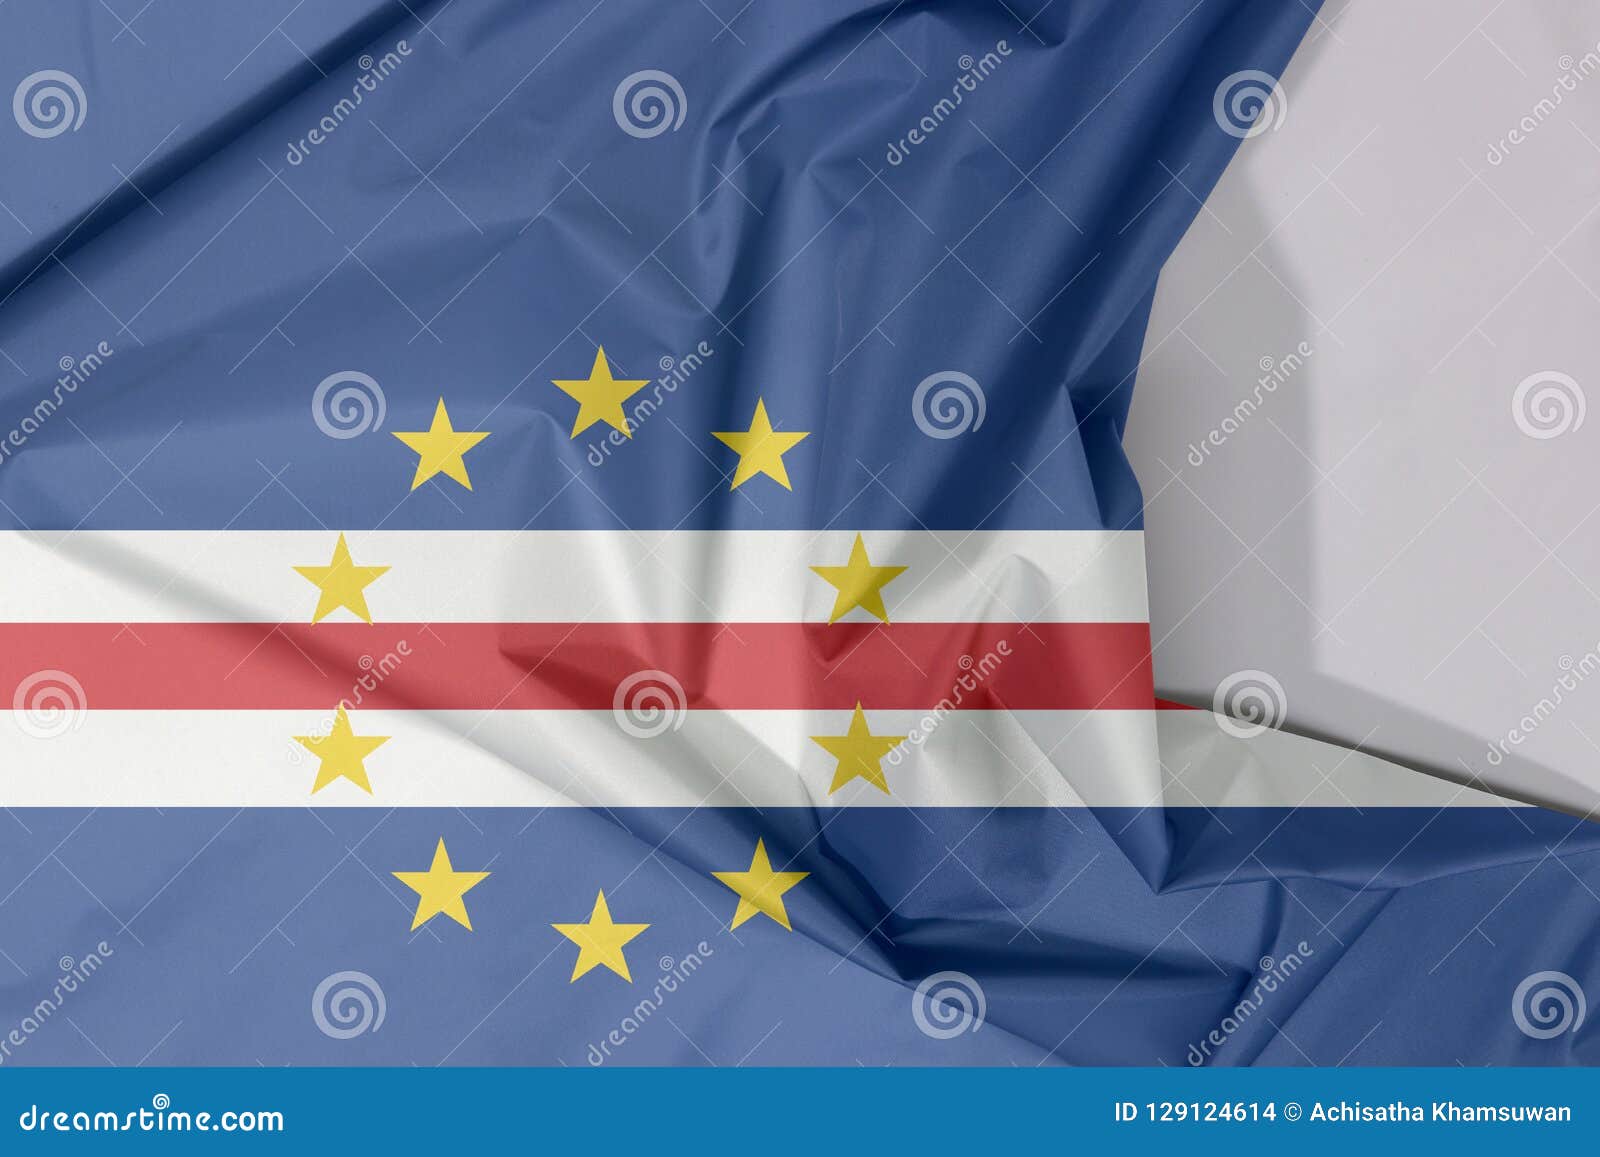 cape verde fabric flag crepe and crease with white space.